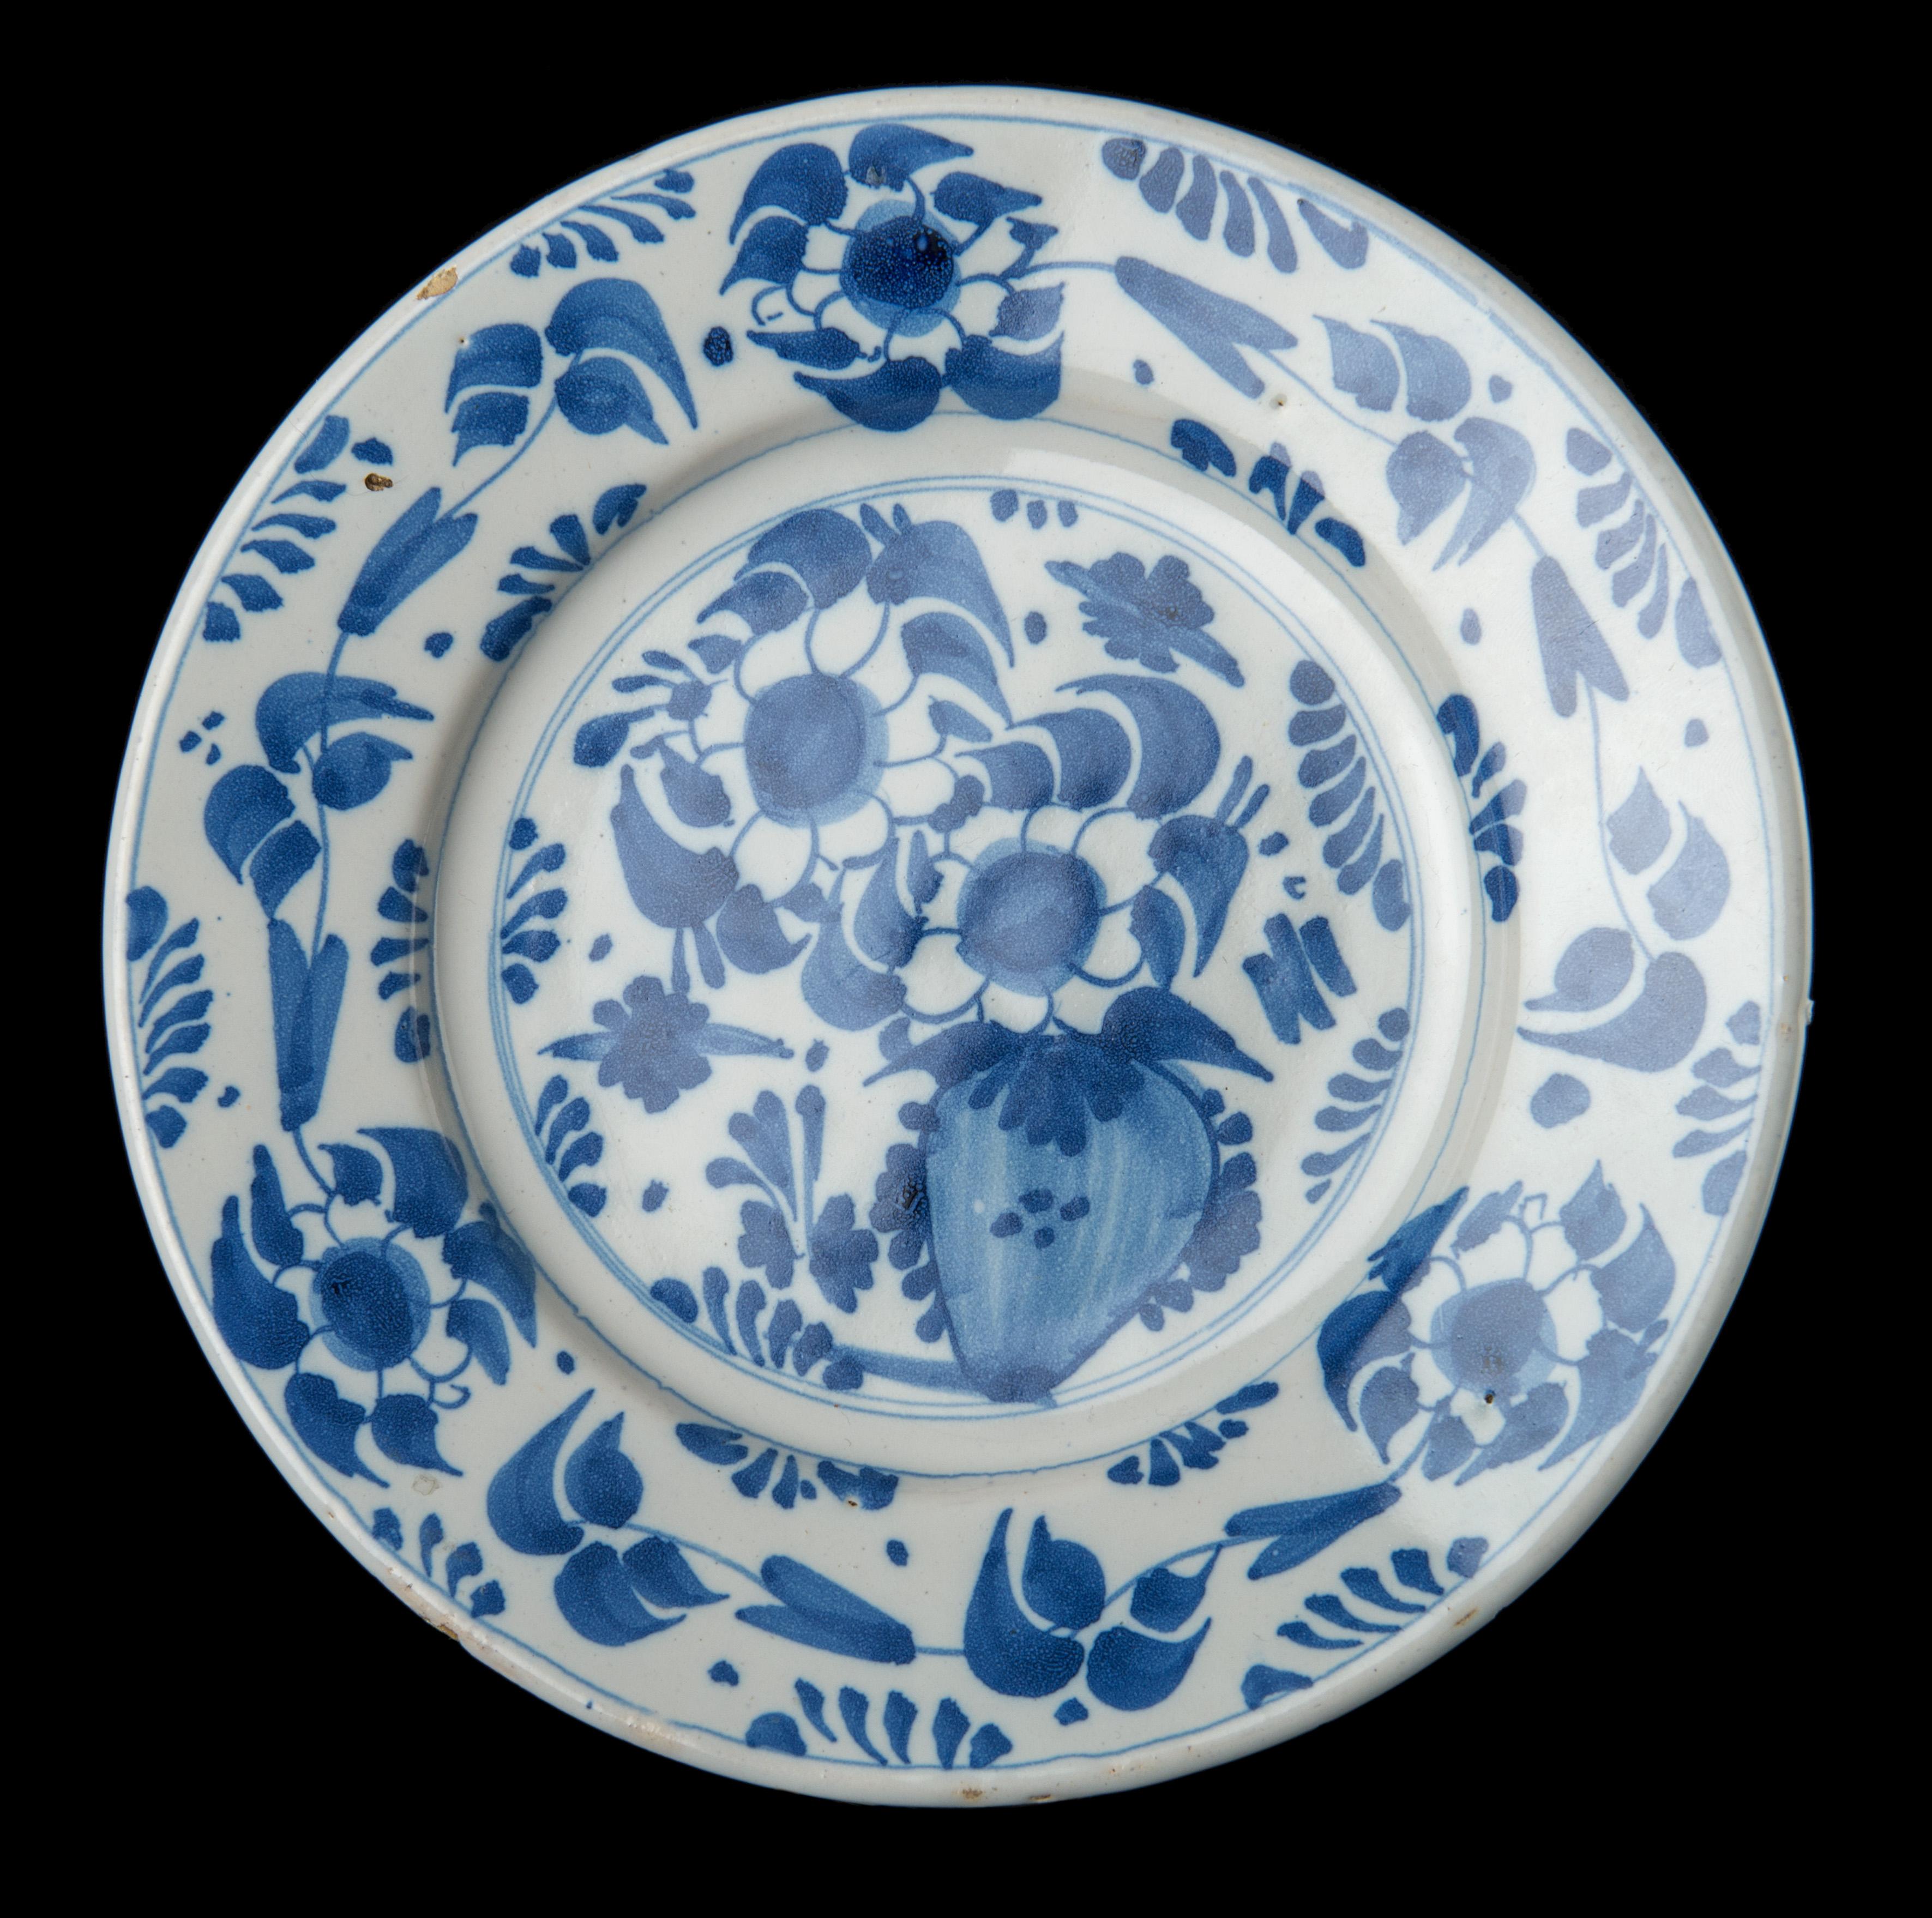 Dutch Blue and White Plate with Flower Vase. Delft, 1650-1680